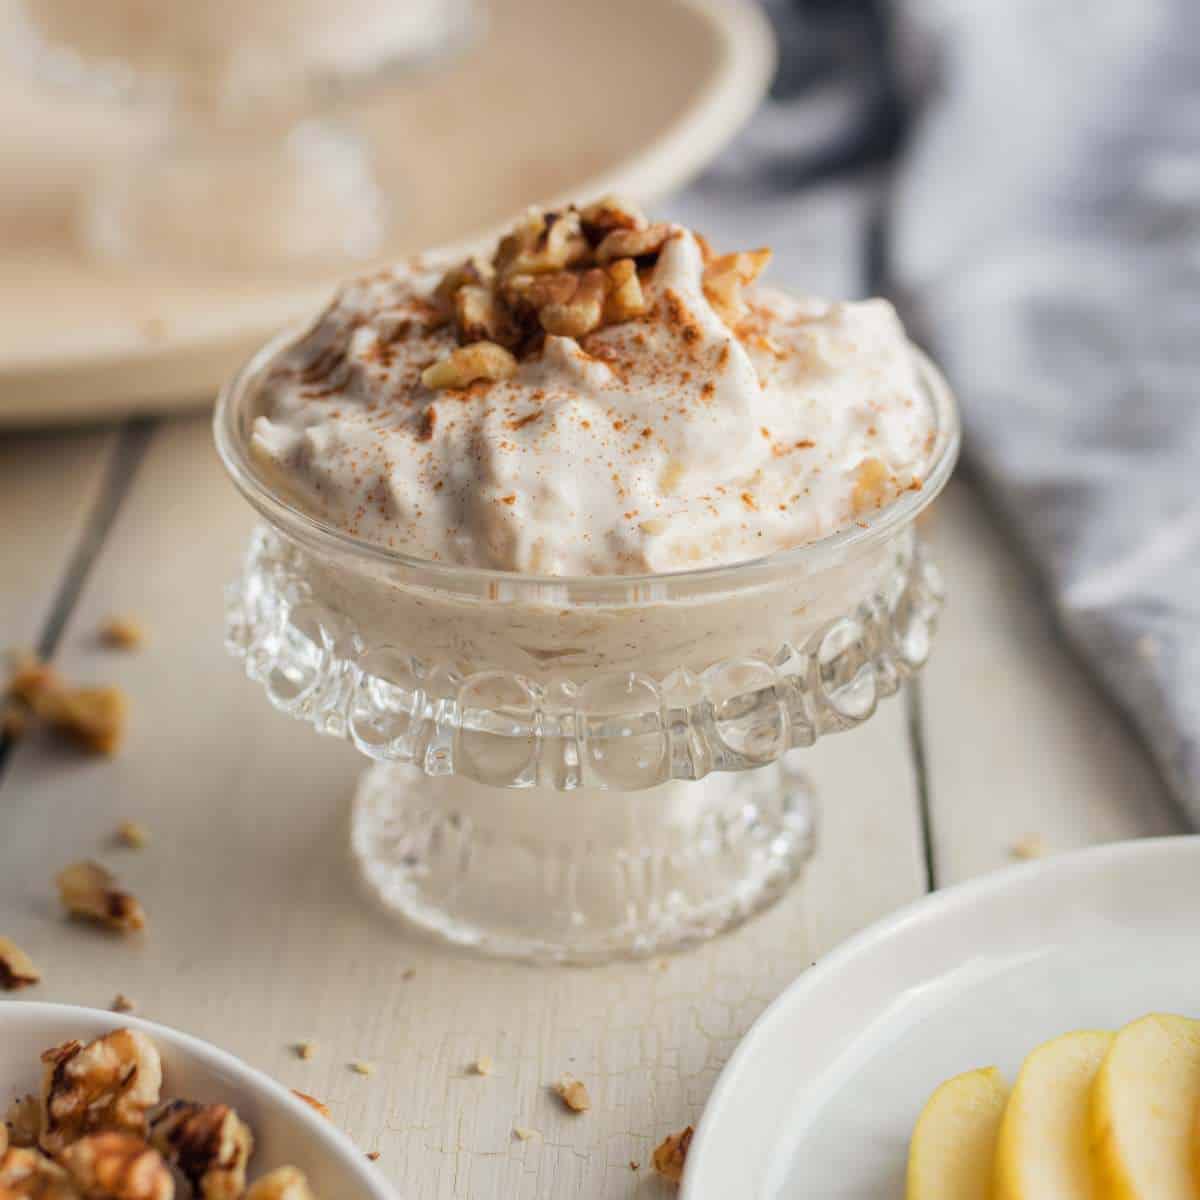 Apple Mousse topped with chopped walnut and cinnamon in an elegant glass dessert dish.